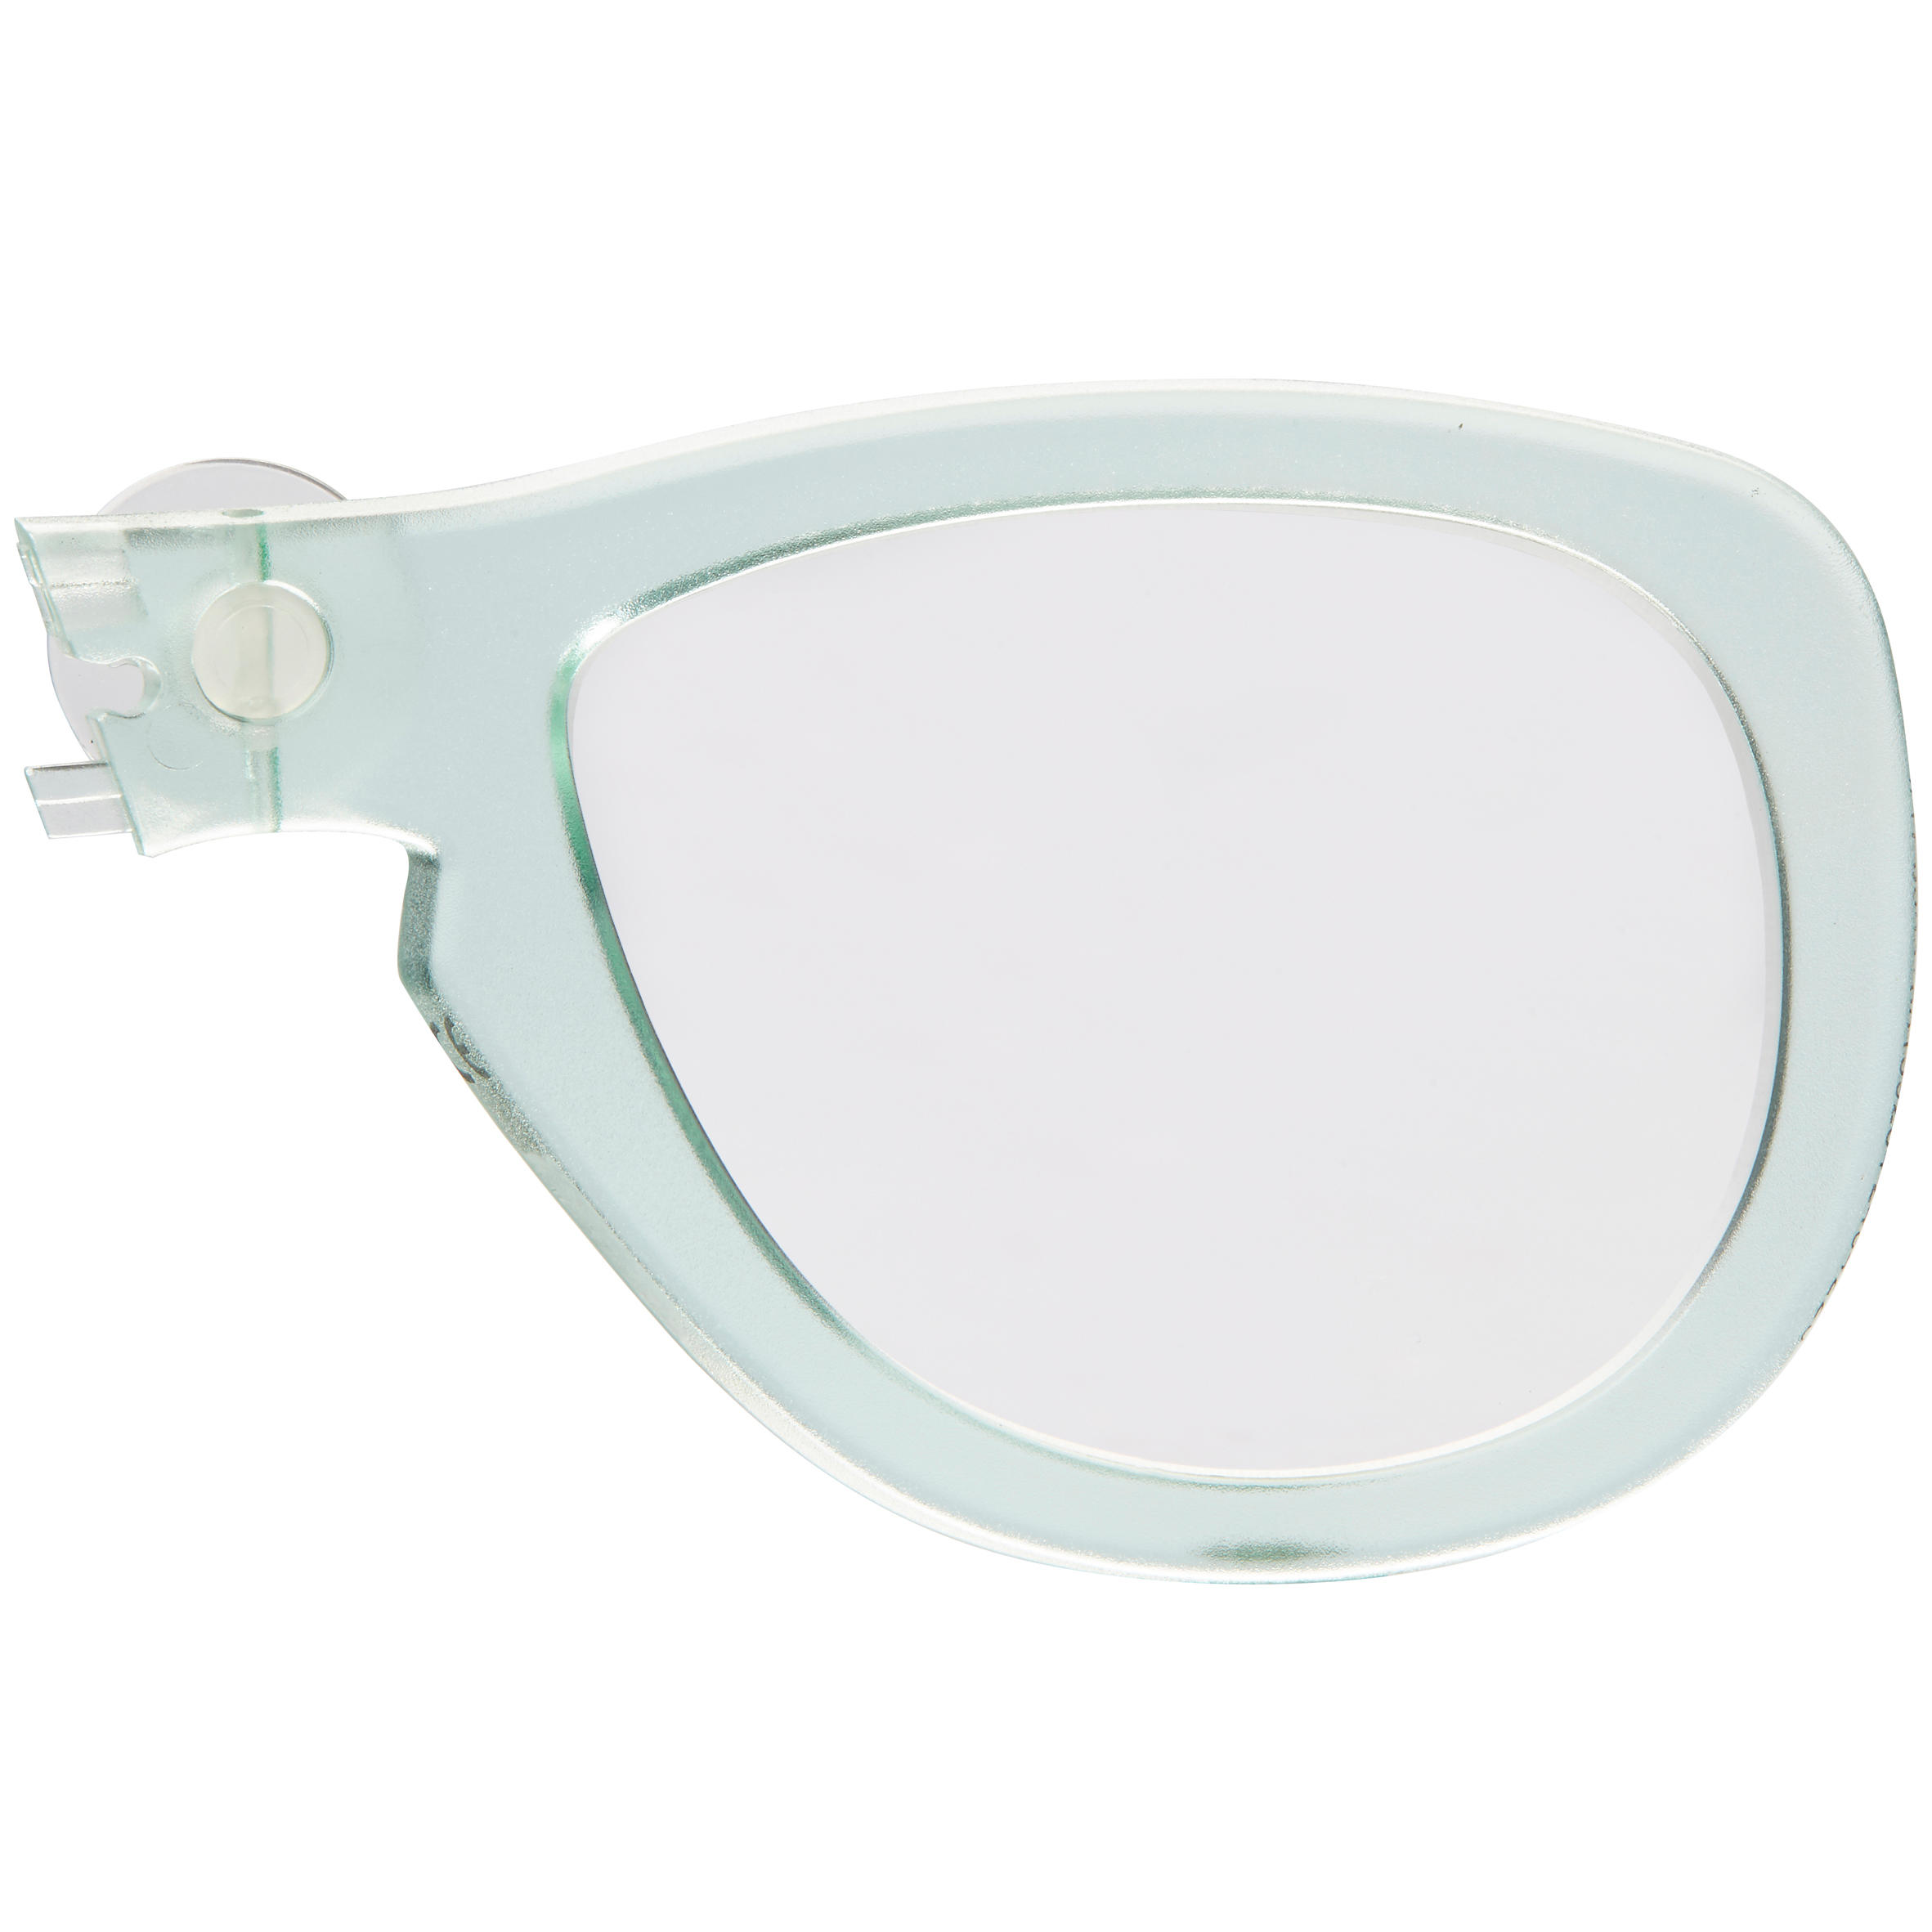 Right corrective lens for the short-sighted for transparent Easybreath masks M/G 2/7